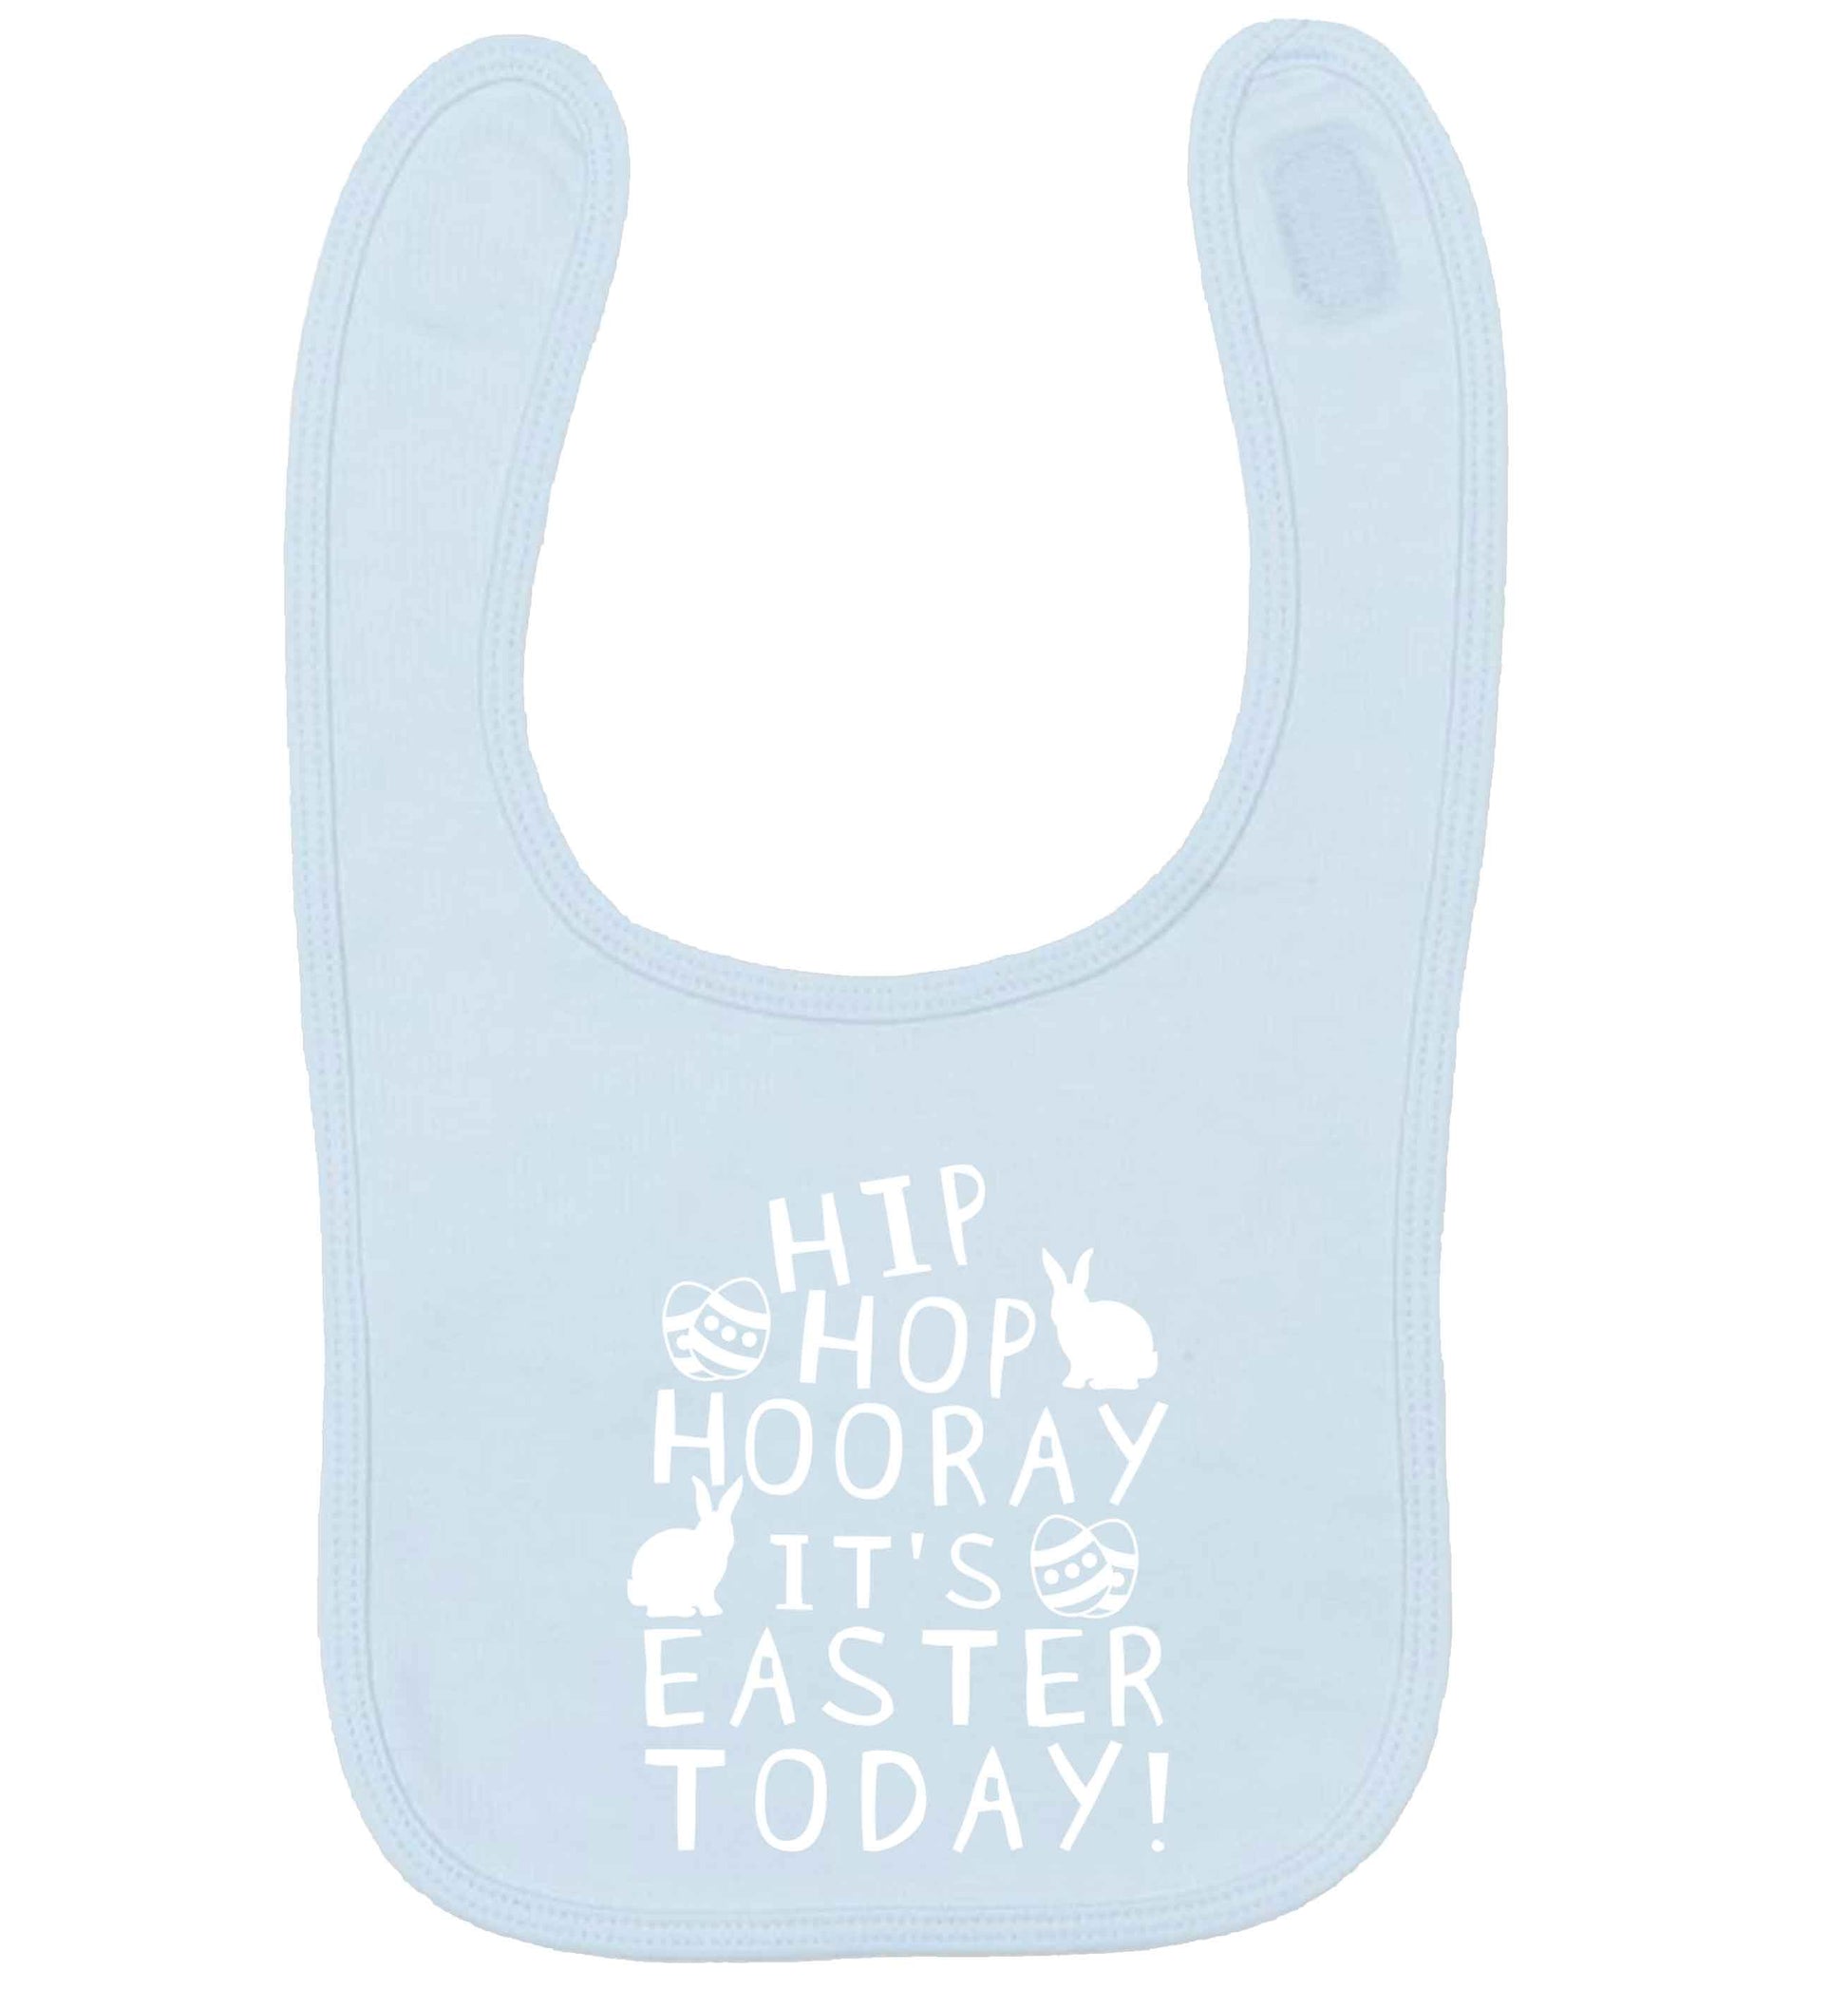 Hip hip hooray it's Easter today! pale blue baby bib